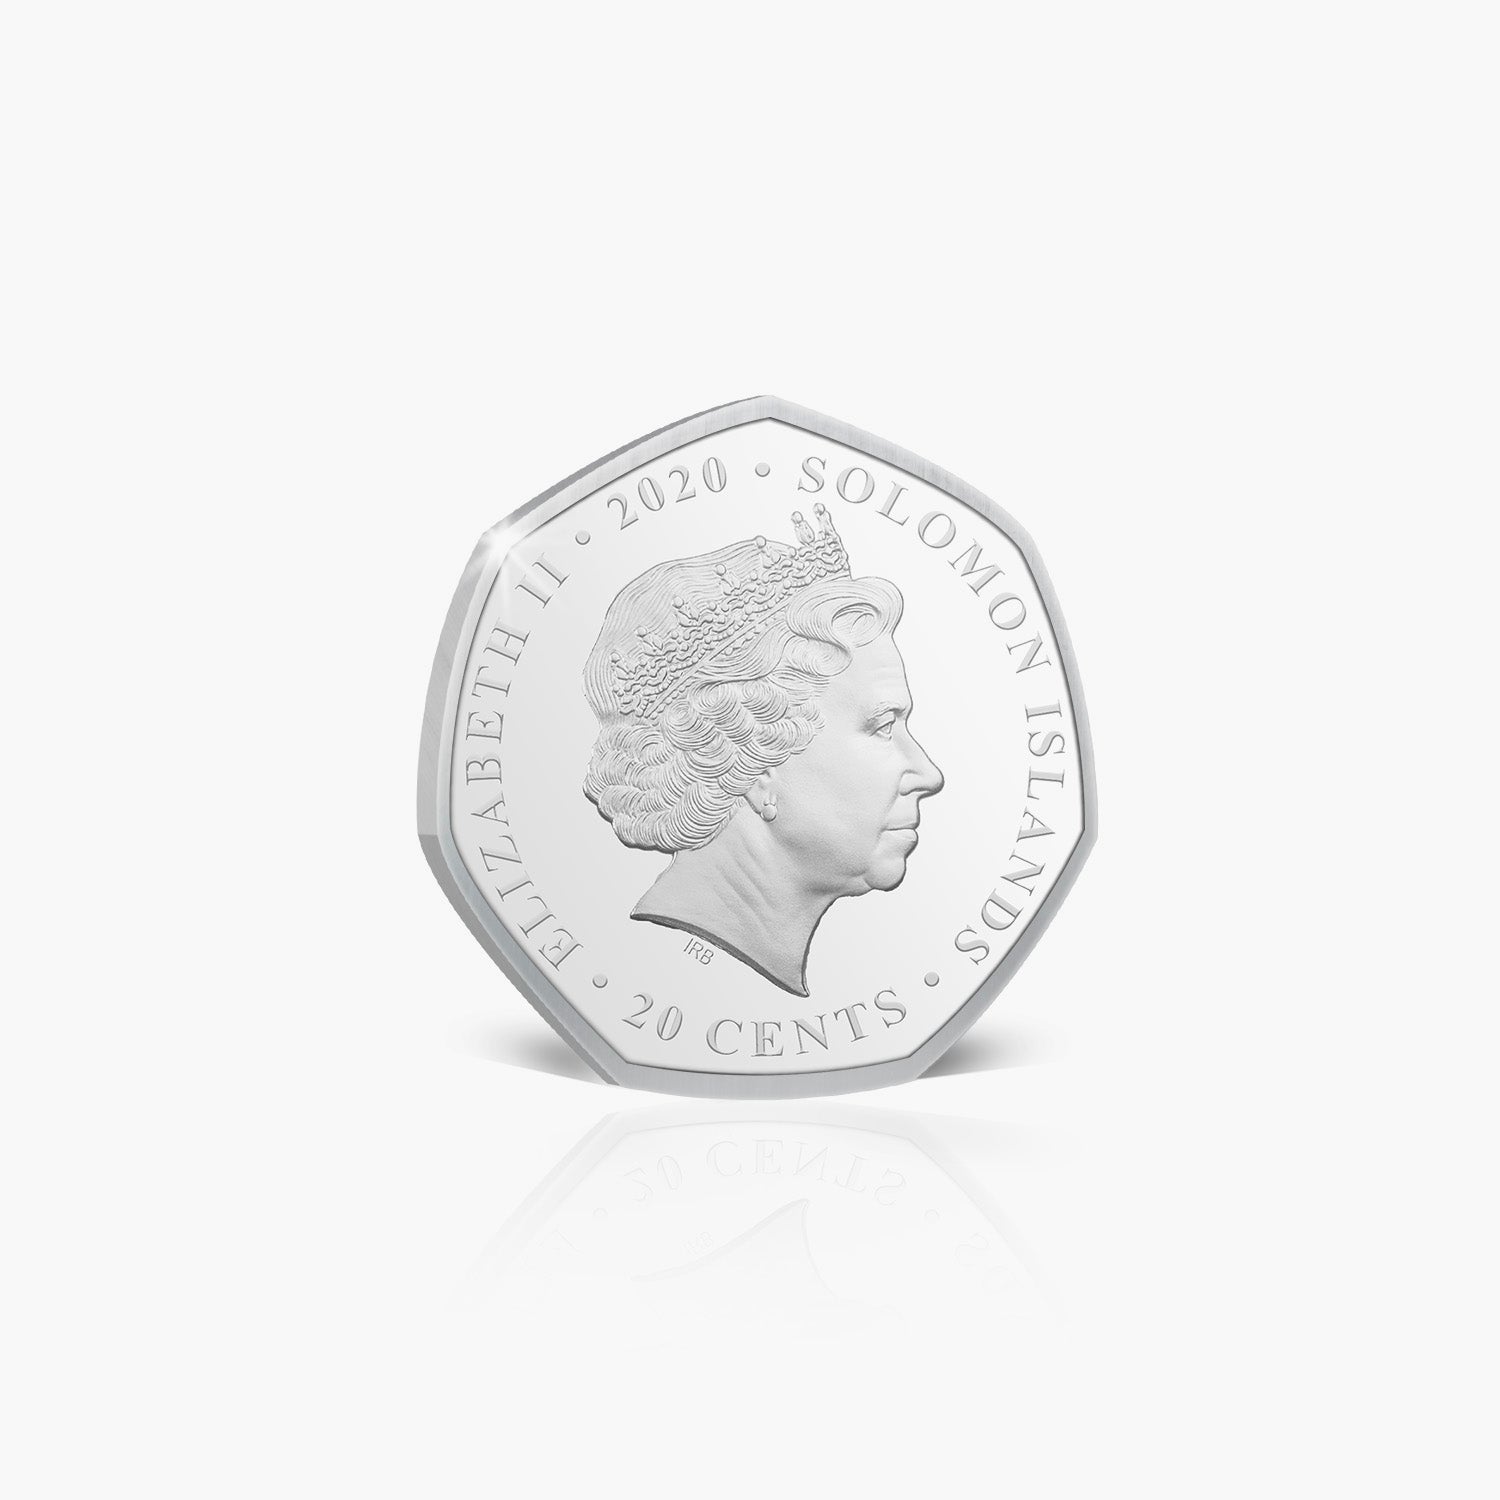 Remembrance Day Is Every Day Silver Plated Coin